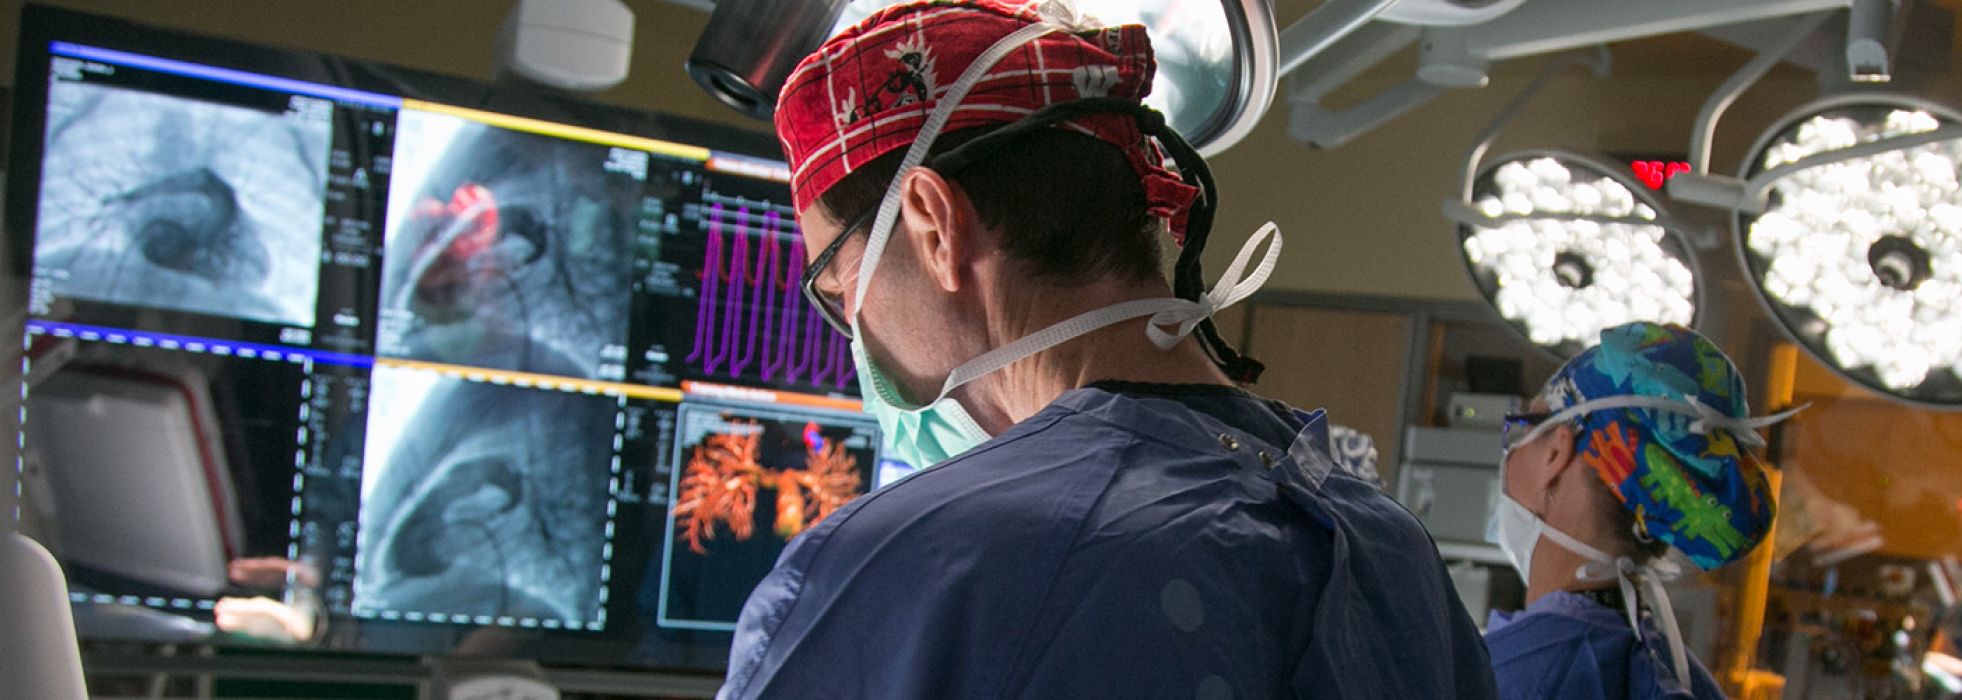 Cardiologist wearing red scrub cap looking at images on a screen in the cath lab